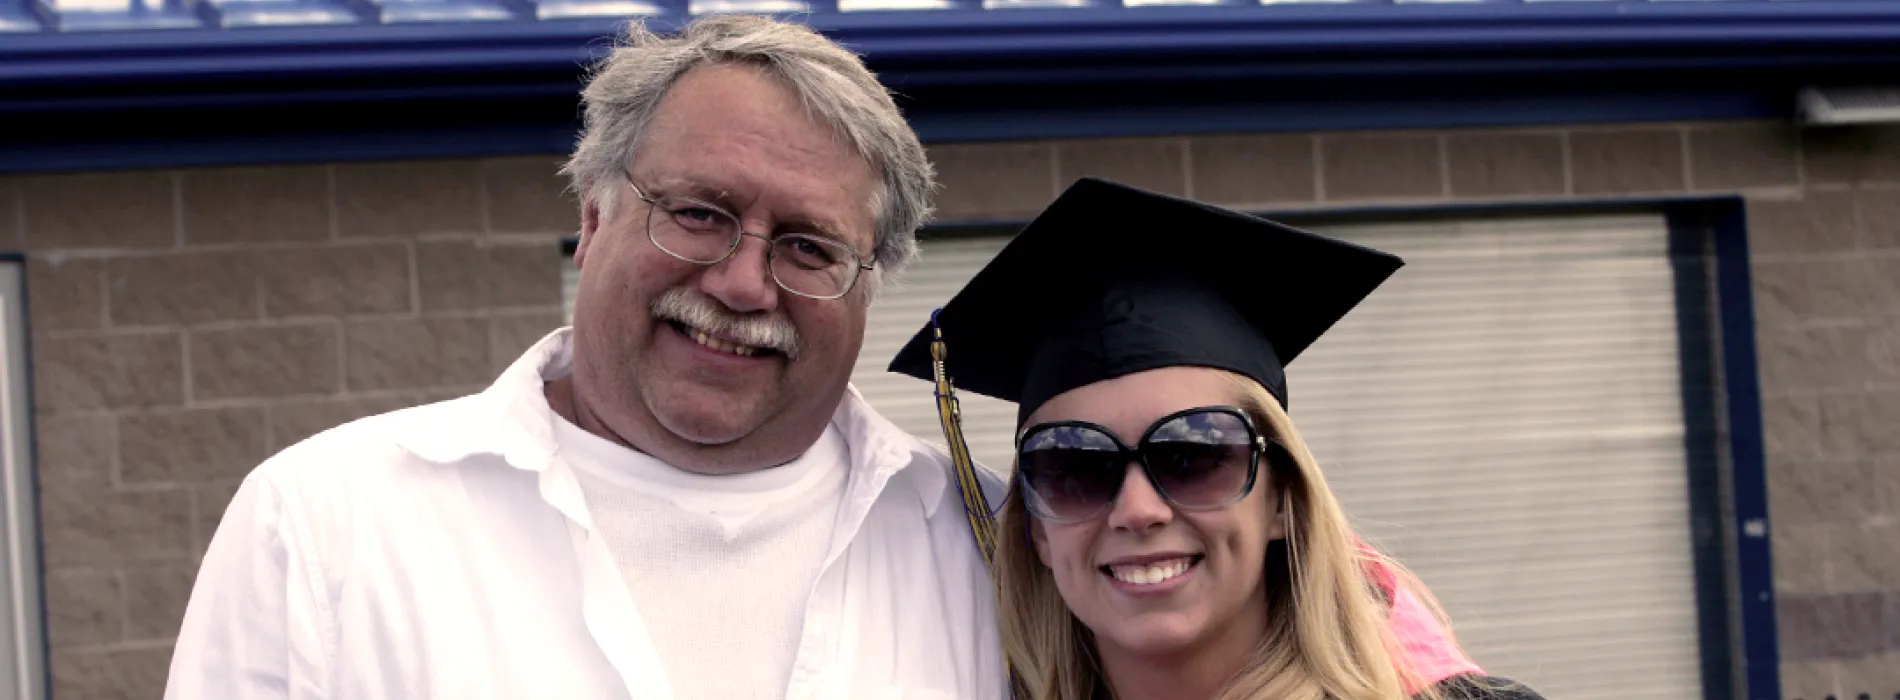 father and daughter, daughter wearing commencement cap and sunglasses